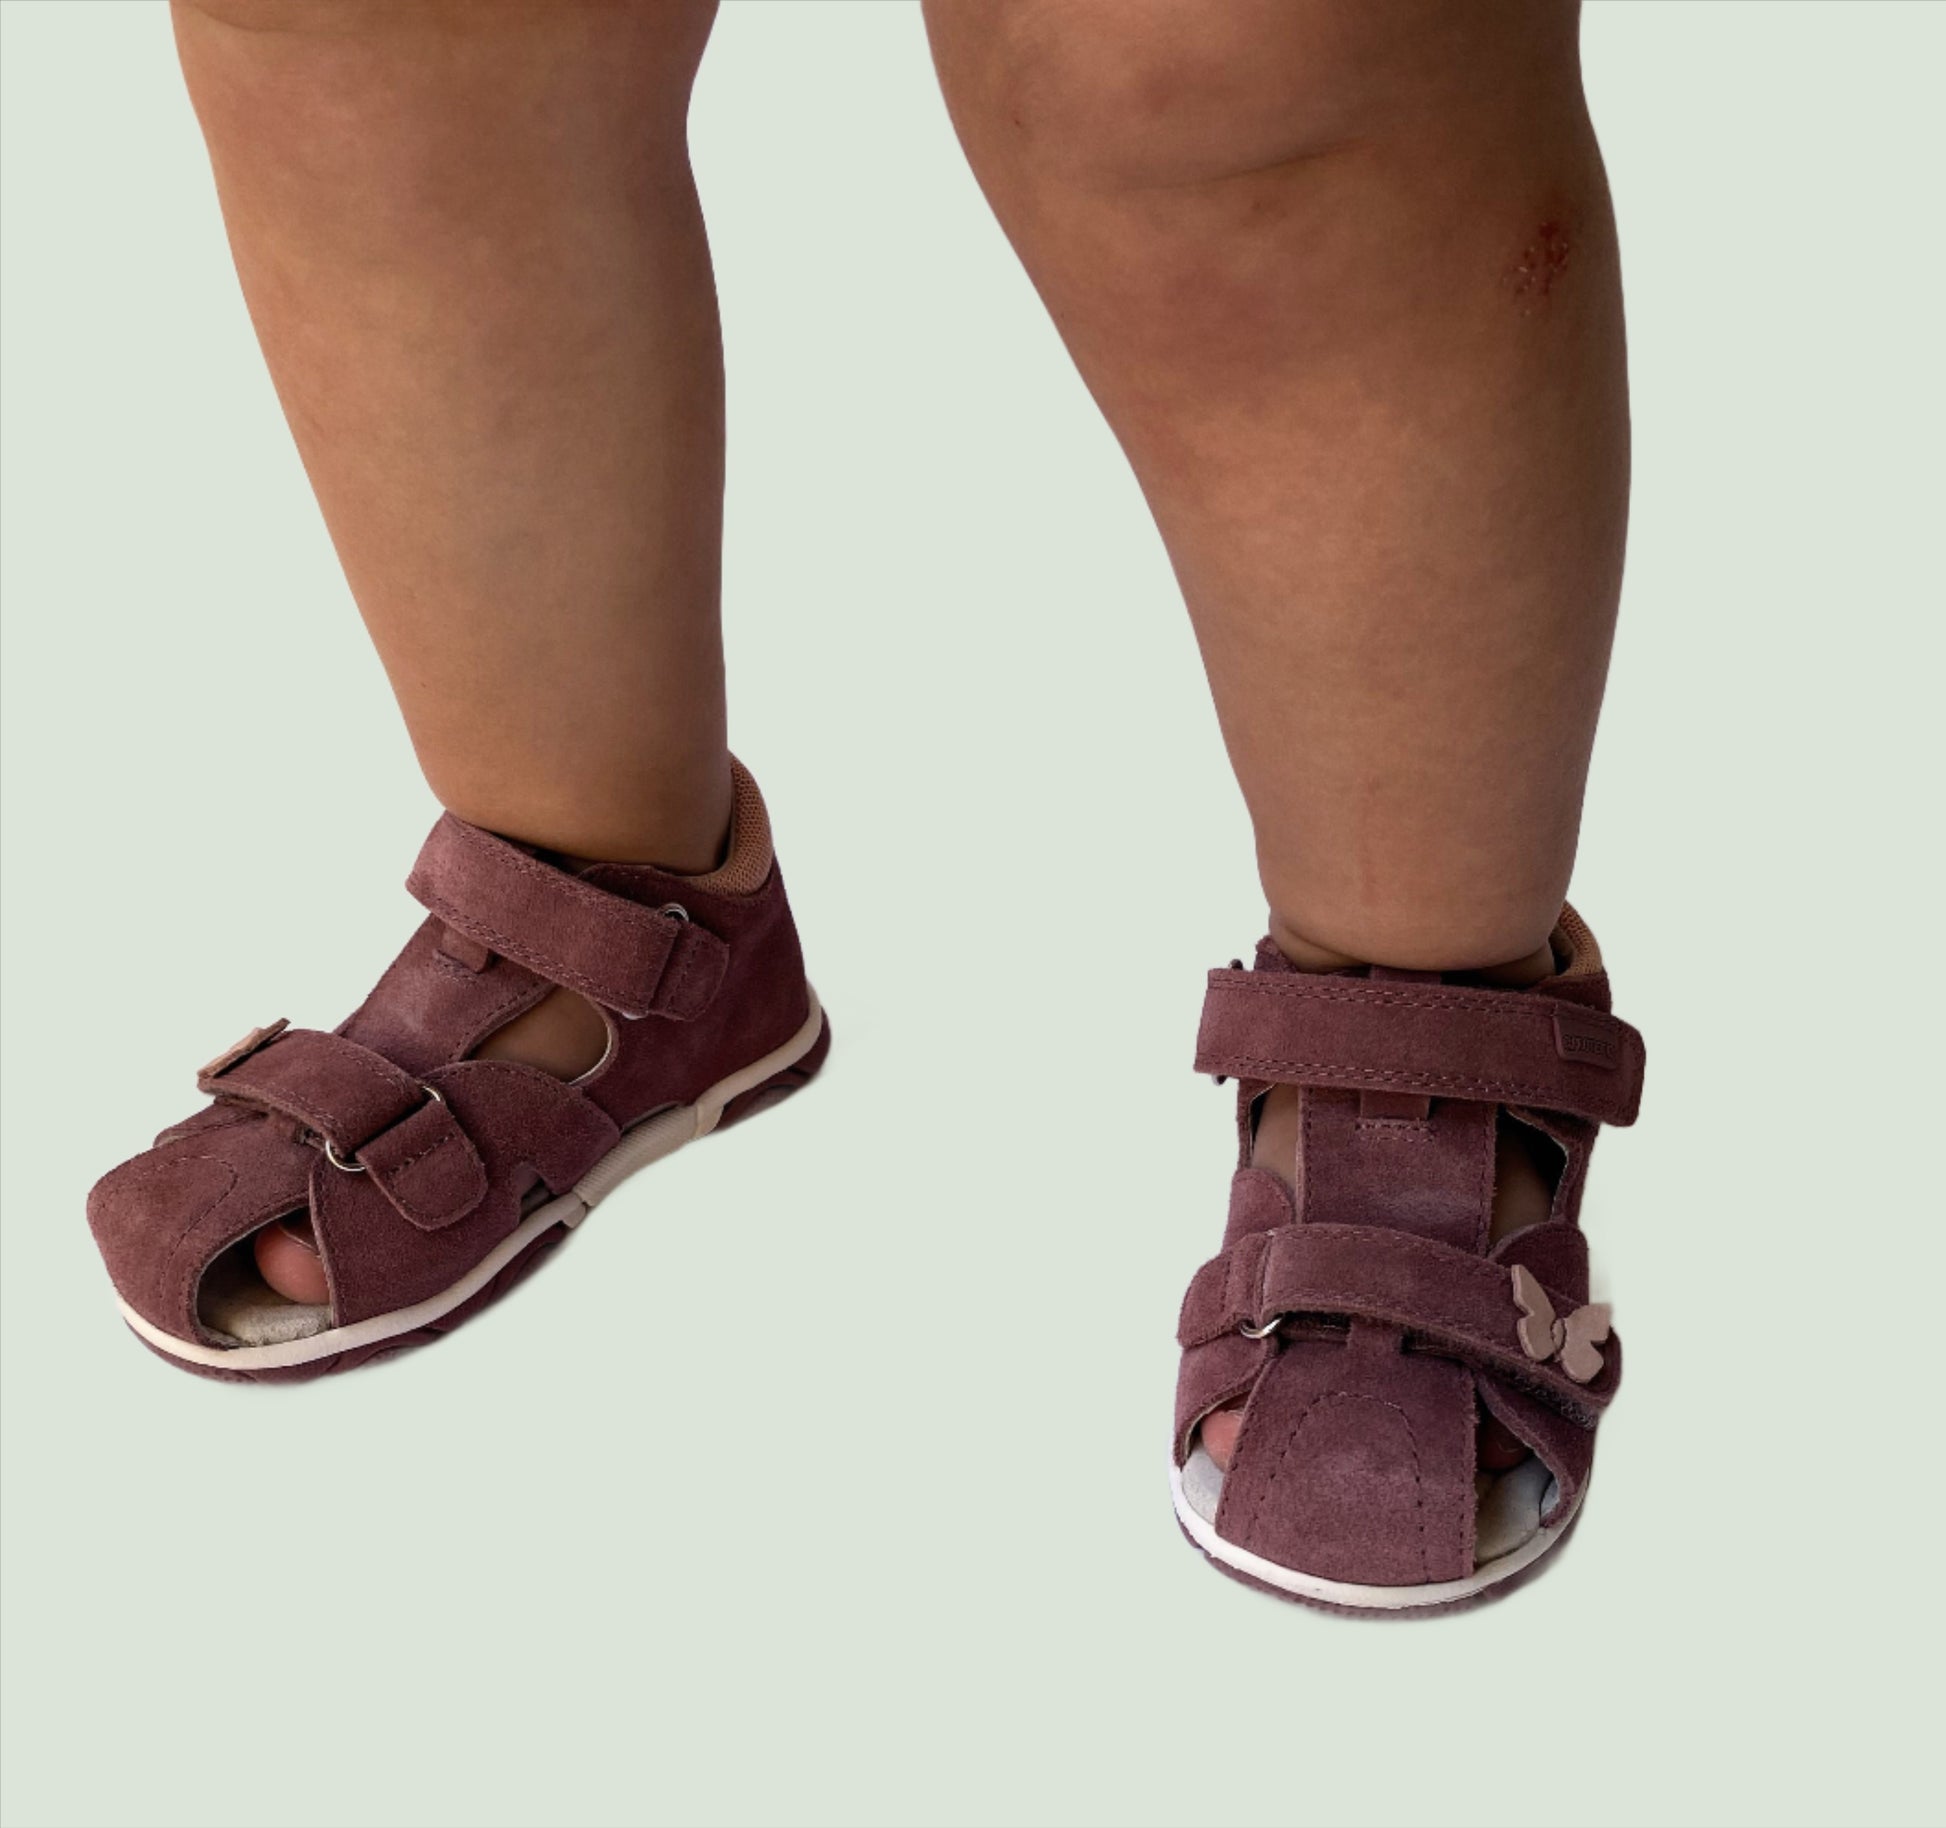 Arch supporting genuine leather suede leather sandal for small girls, firstwalkers up to 3 years.